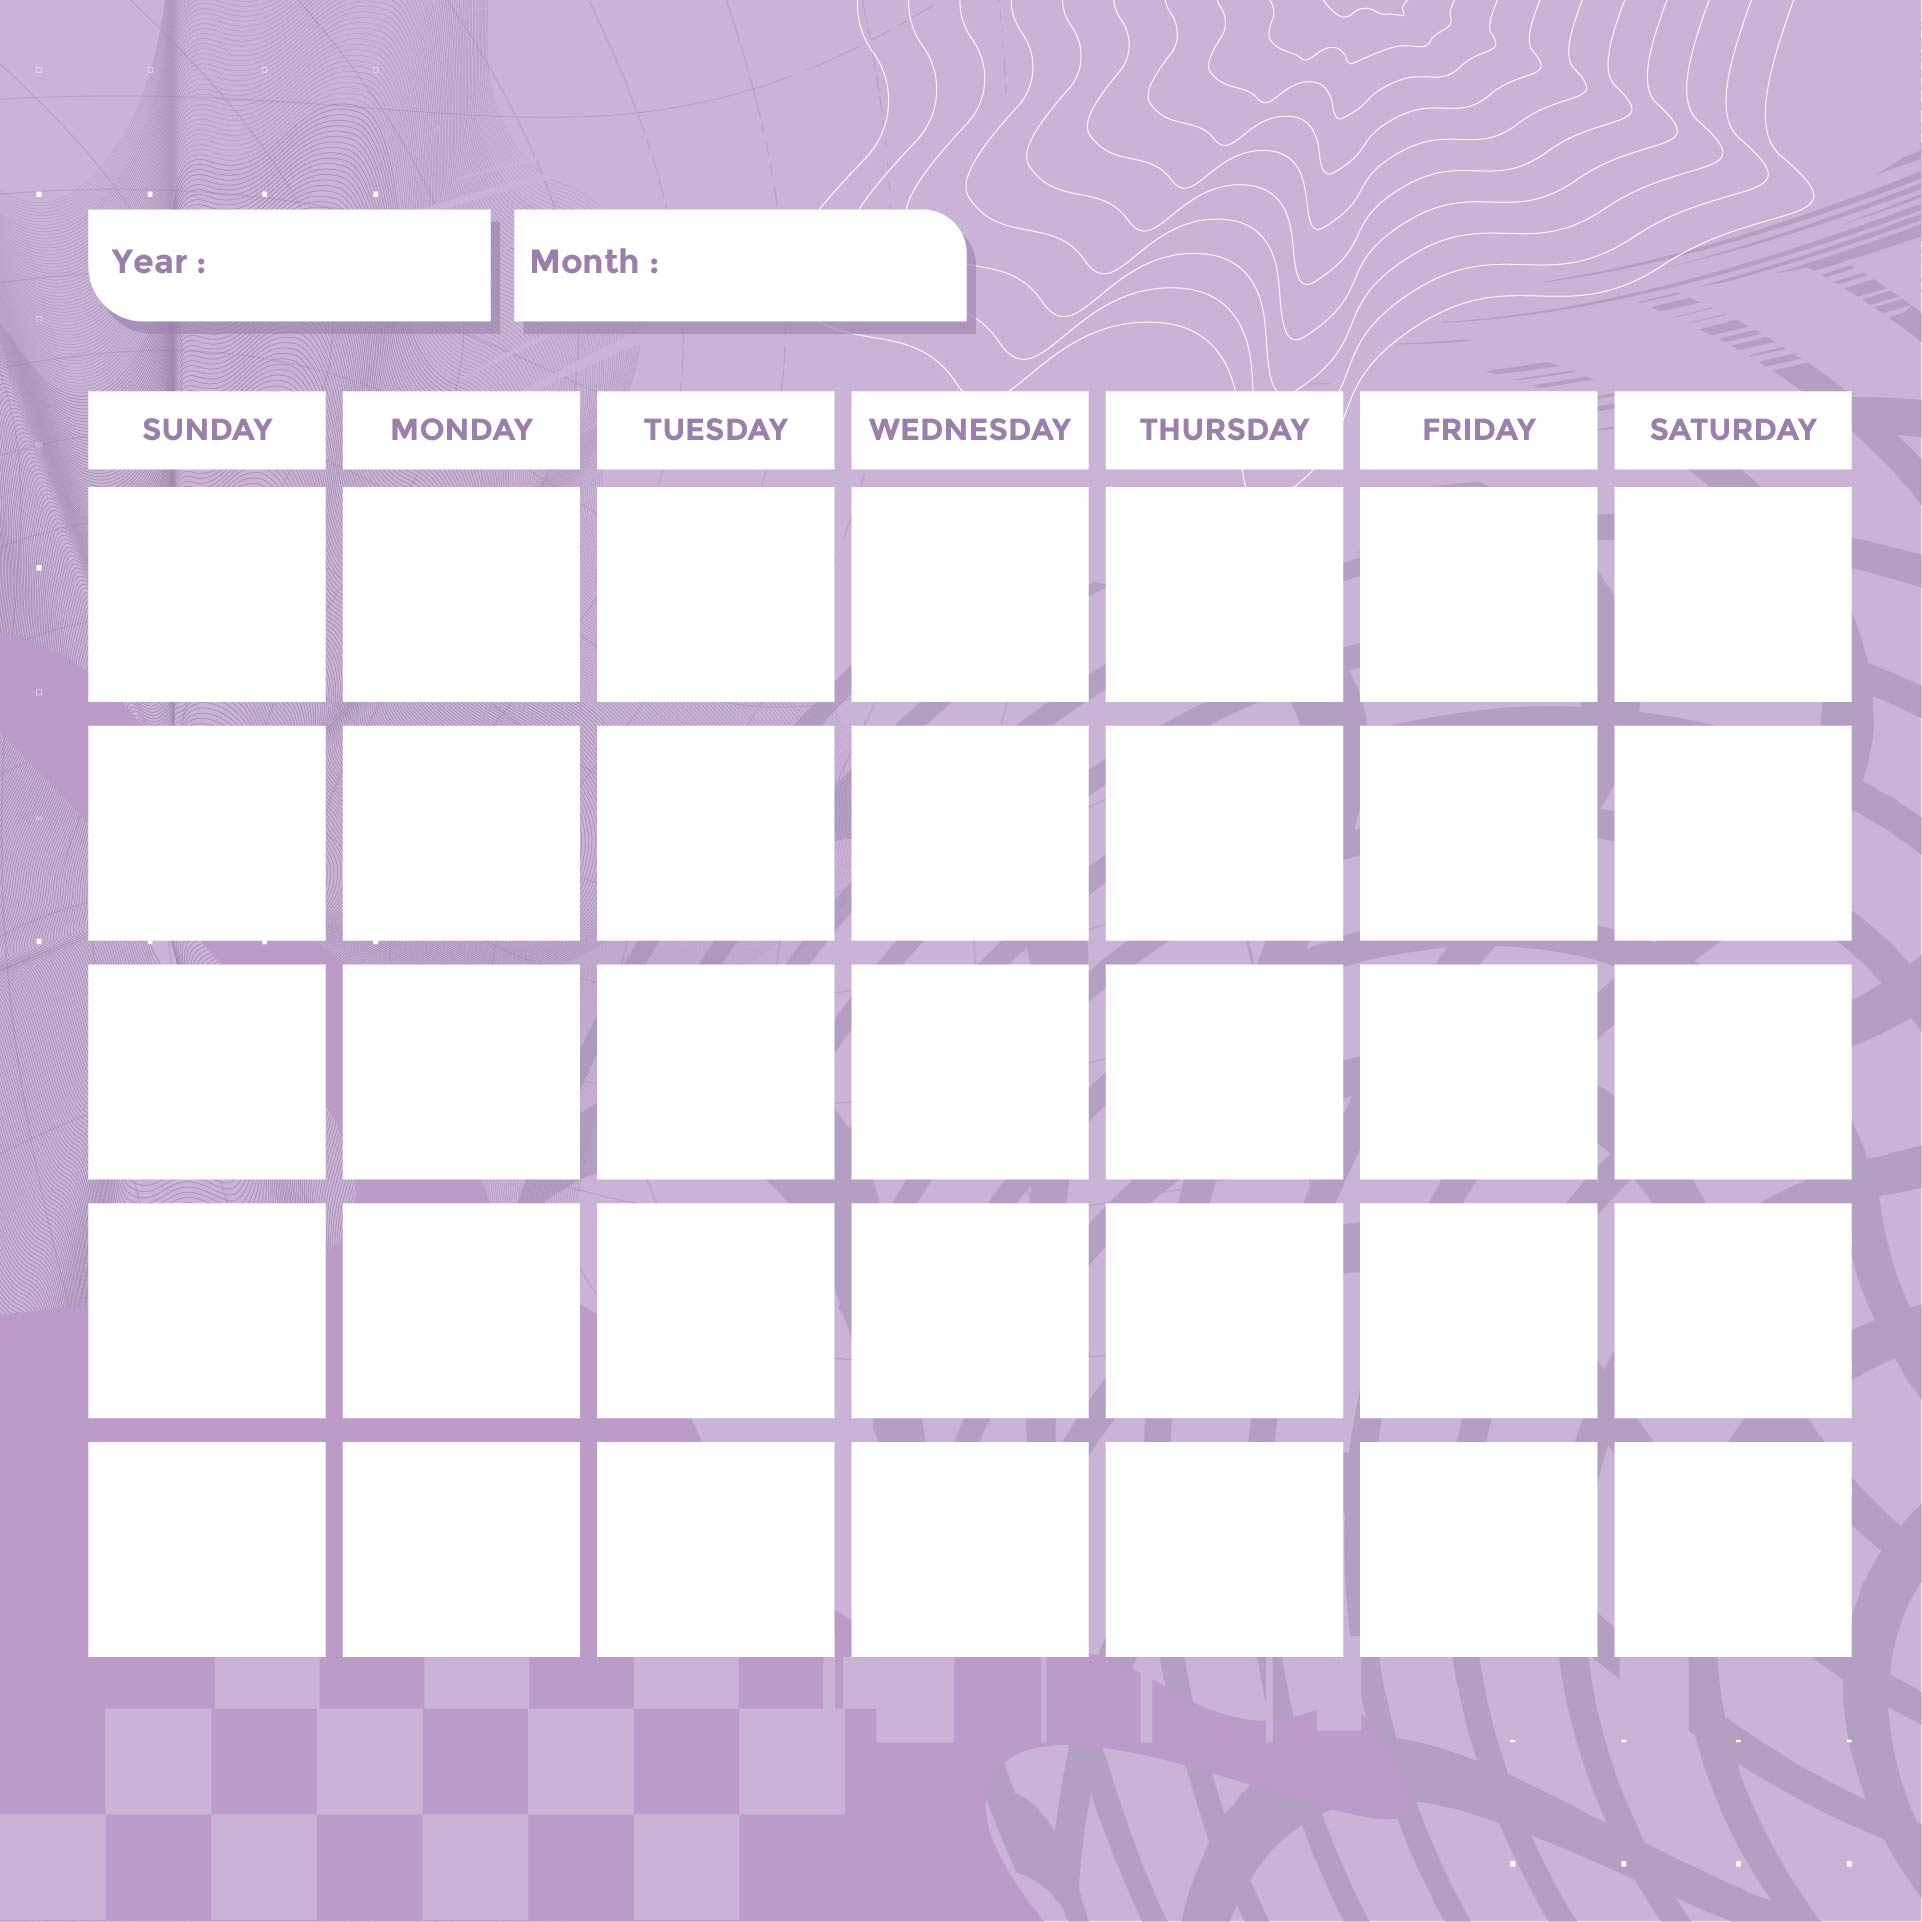 8 Best Images of Monthly Calendar Printable Free